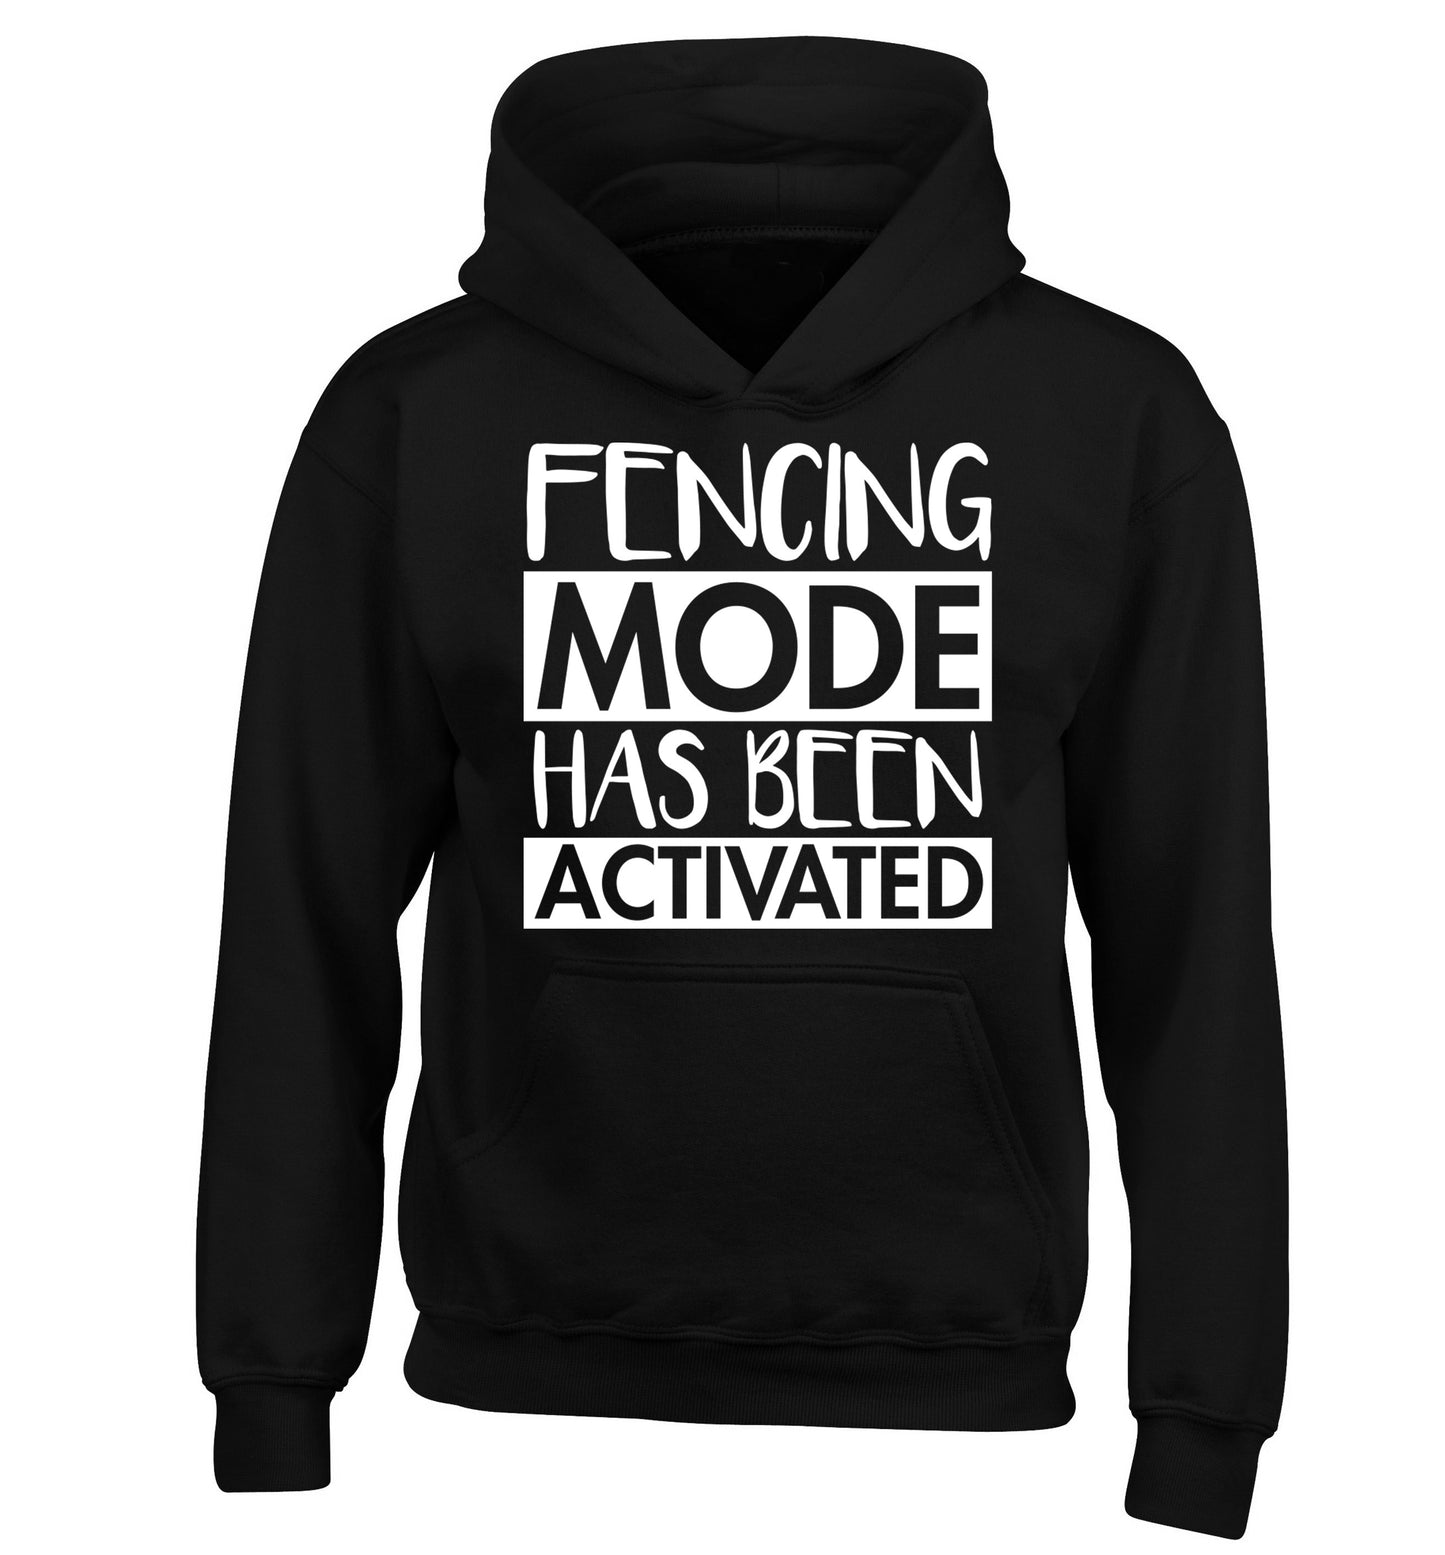 Fencing mode activated children's black hoodie 12-14 Years